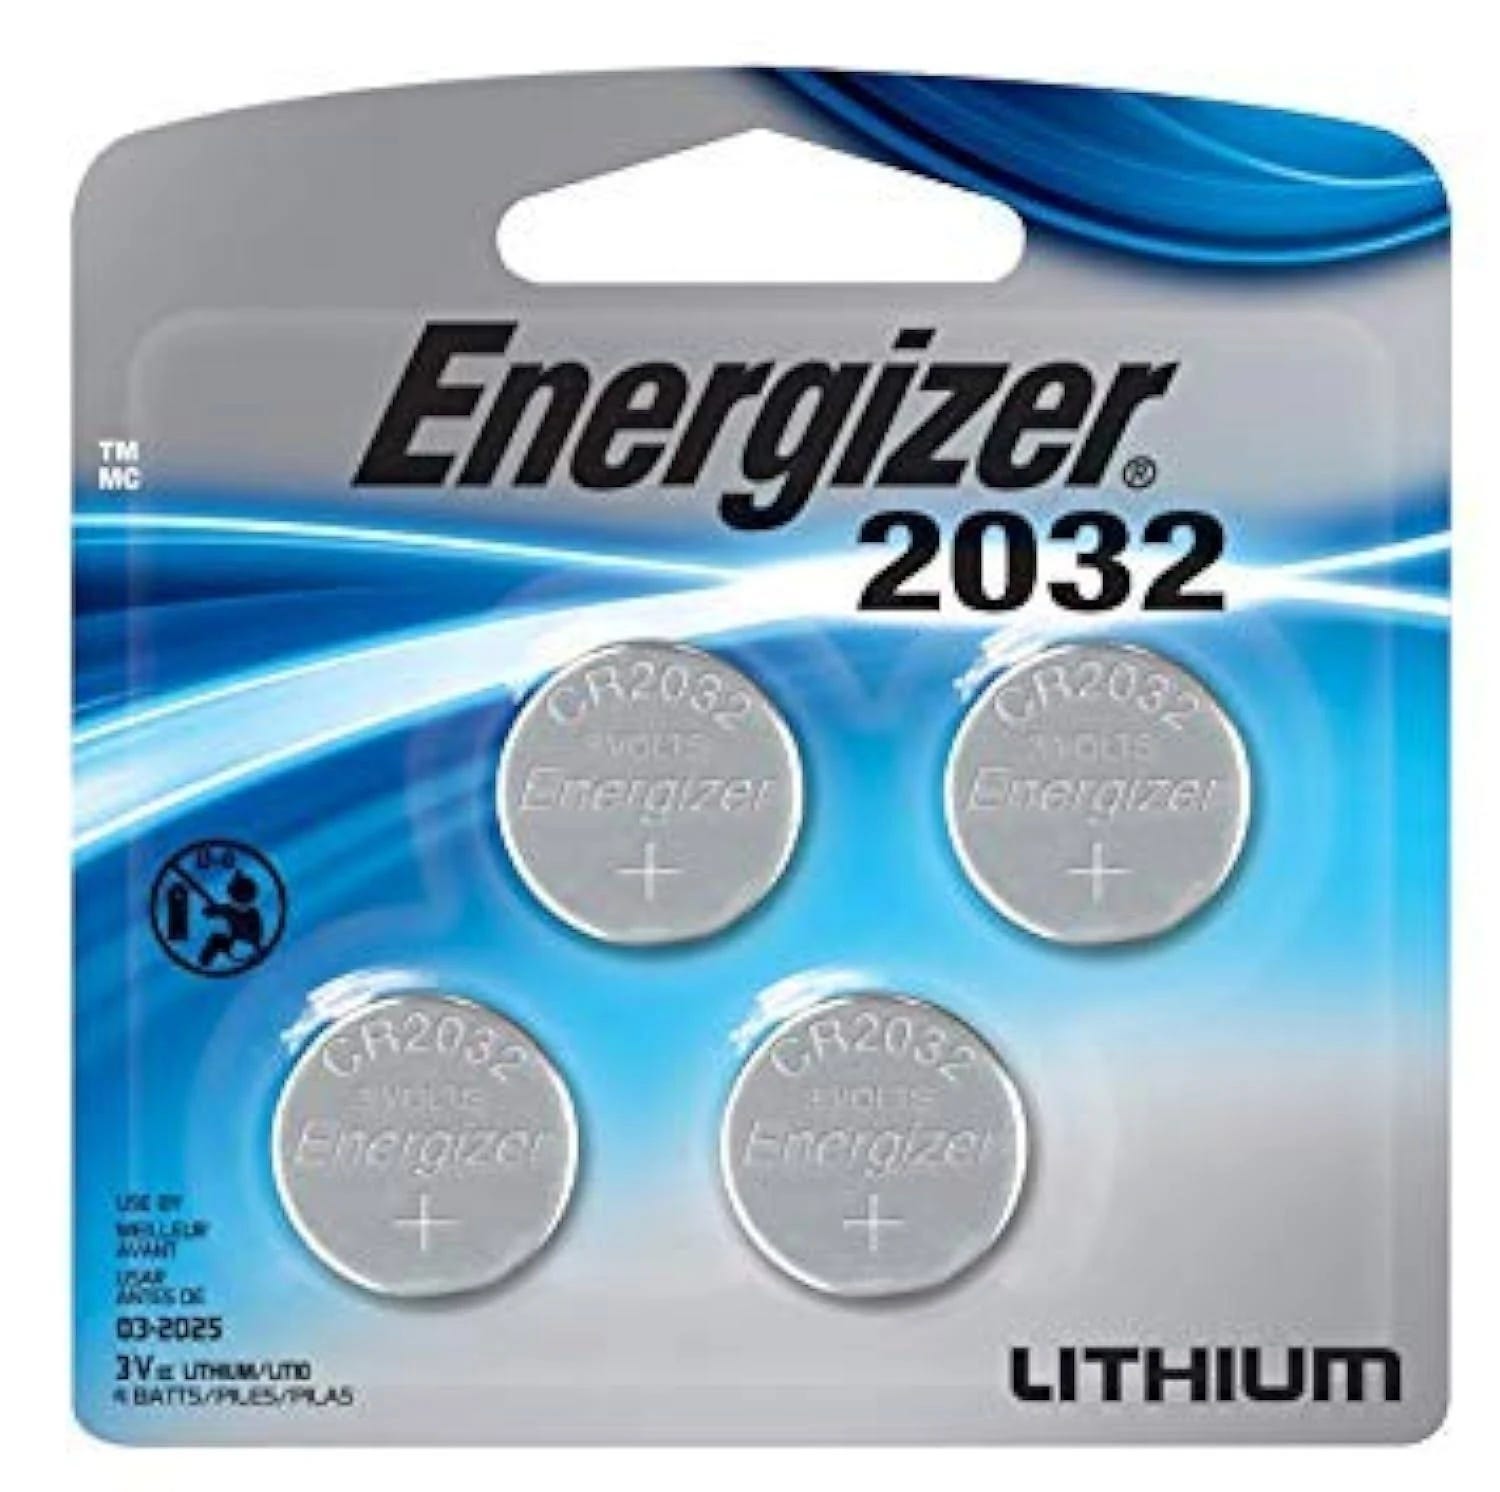 Energizer Lithium Button Cells (2032) - 2 Pack 2x2 | Image